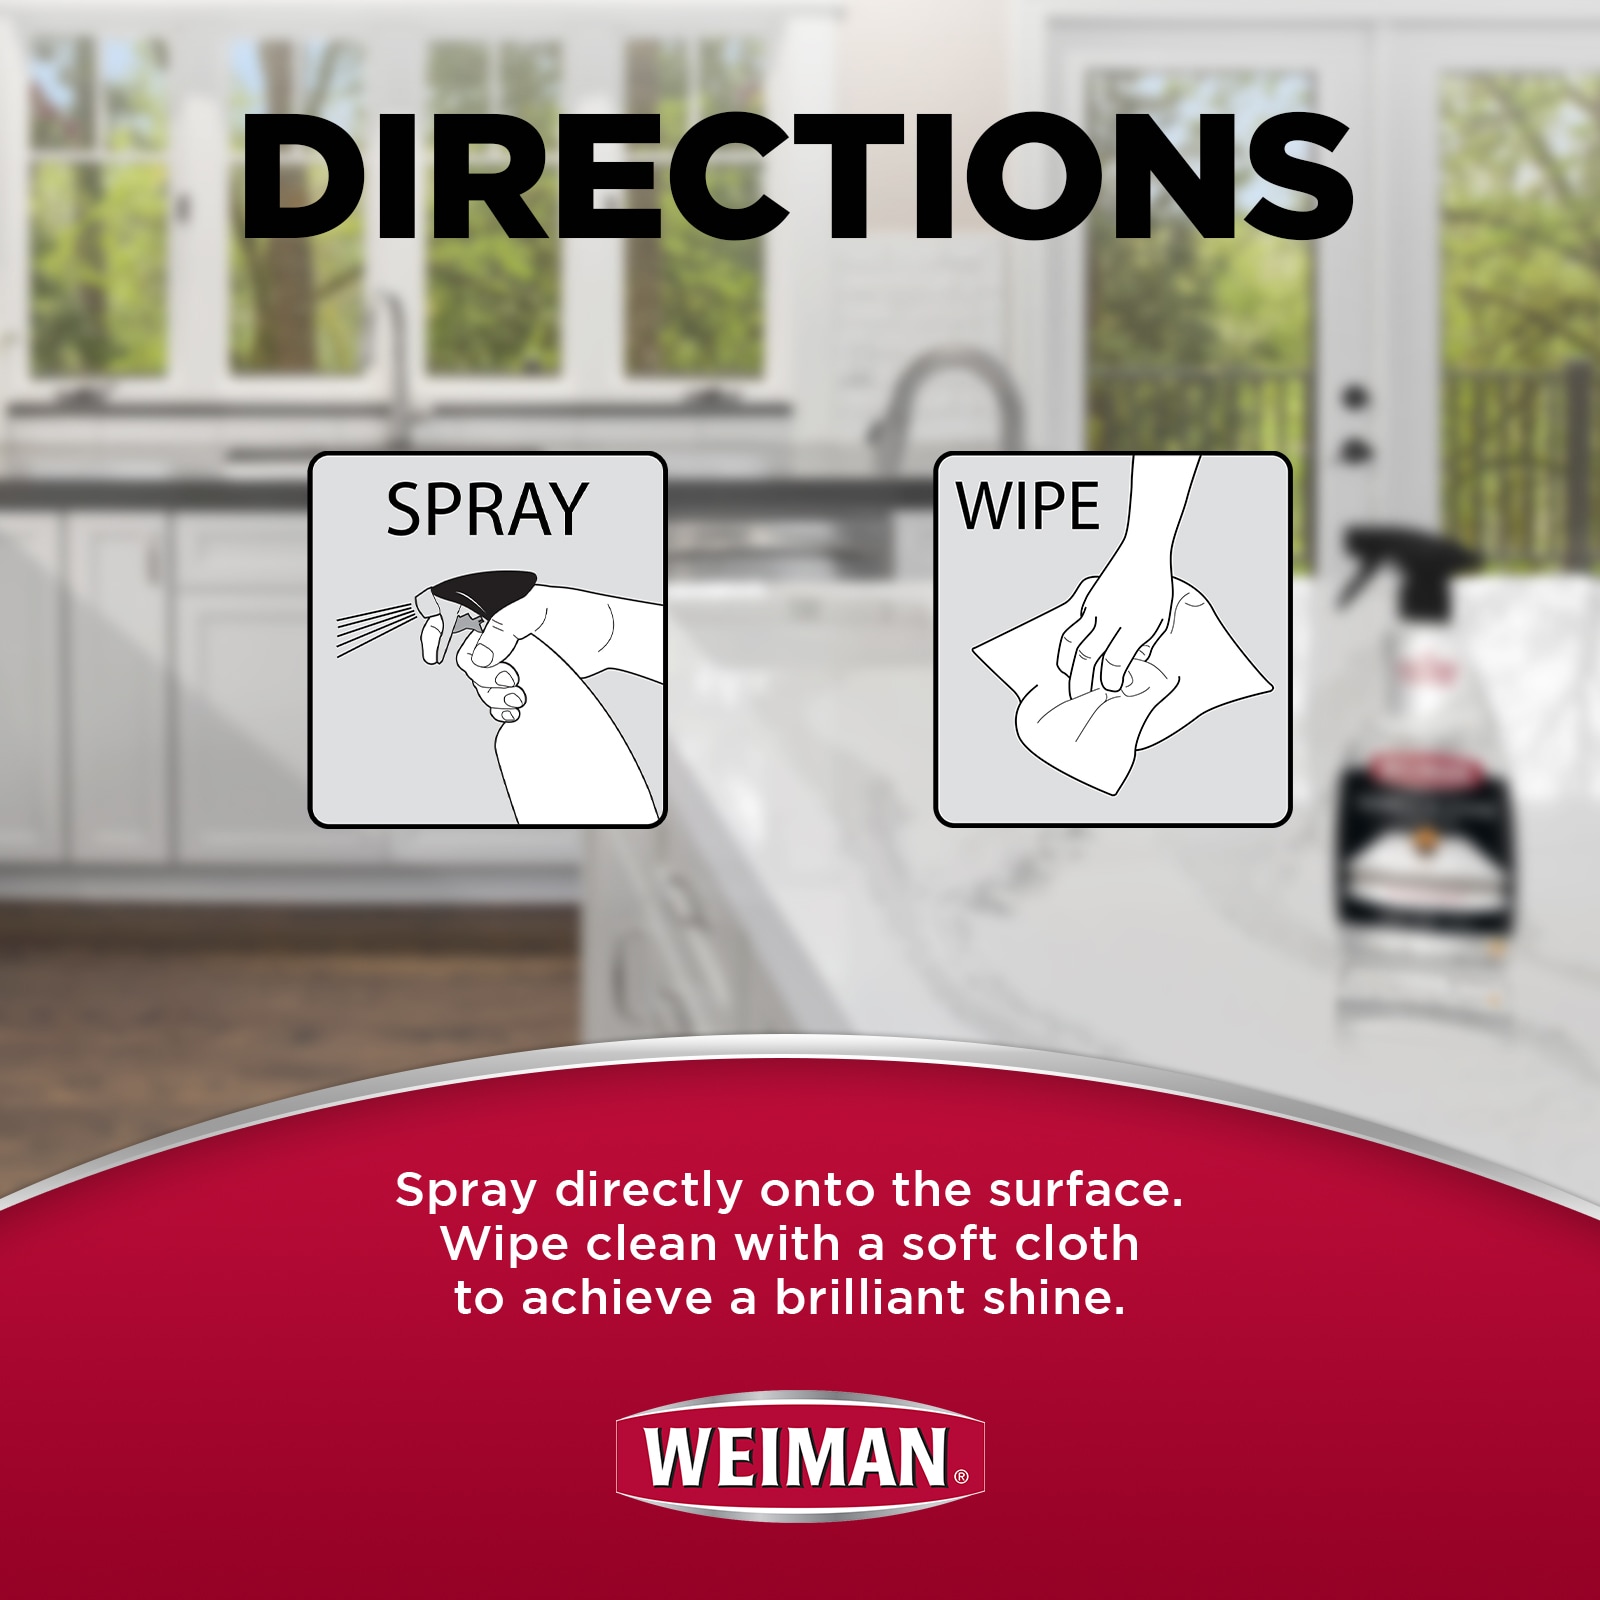 Weiman Stainless Steel Wipes and Granite Wipes (30 Count Each) - Keep  Appliances Shining Bright and Protect Countertops with the pH Neutral  Formula